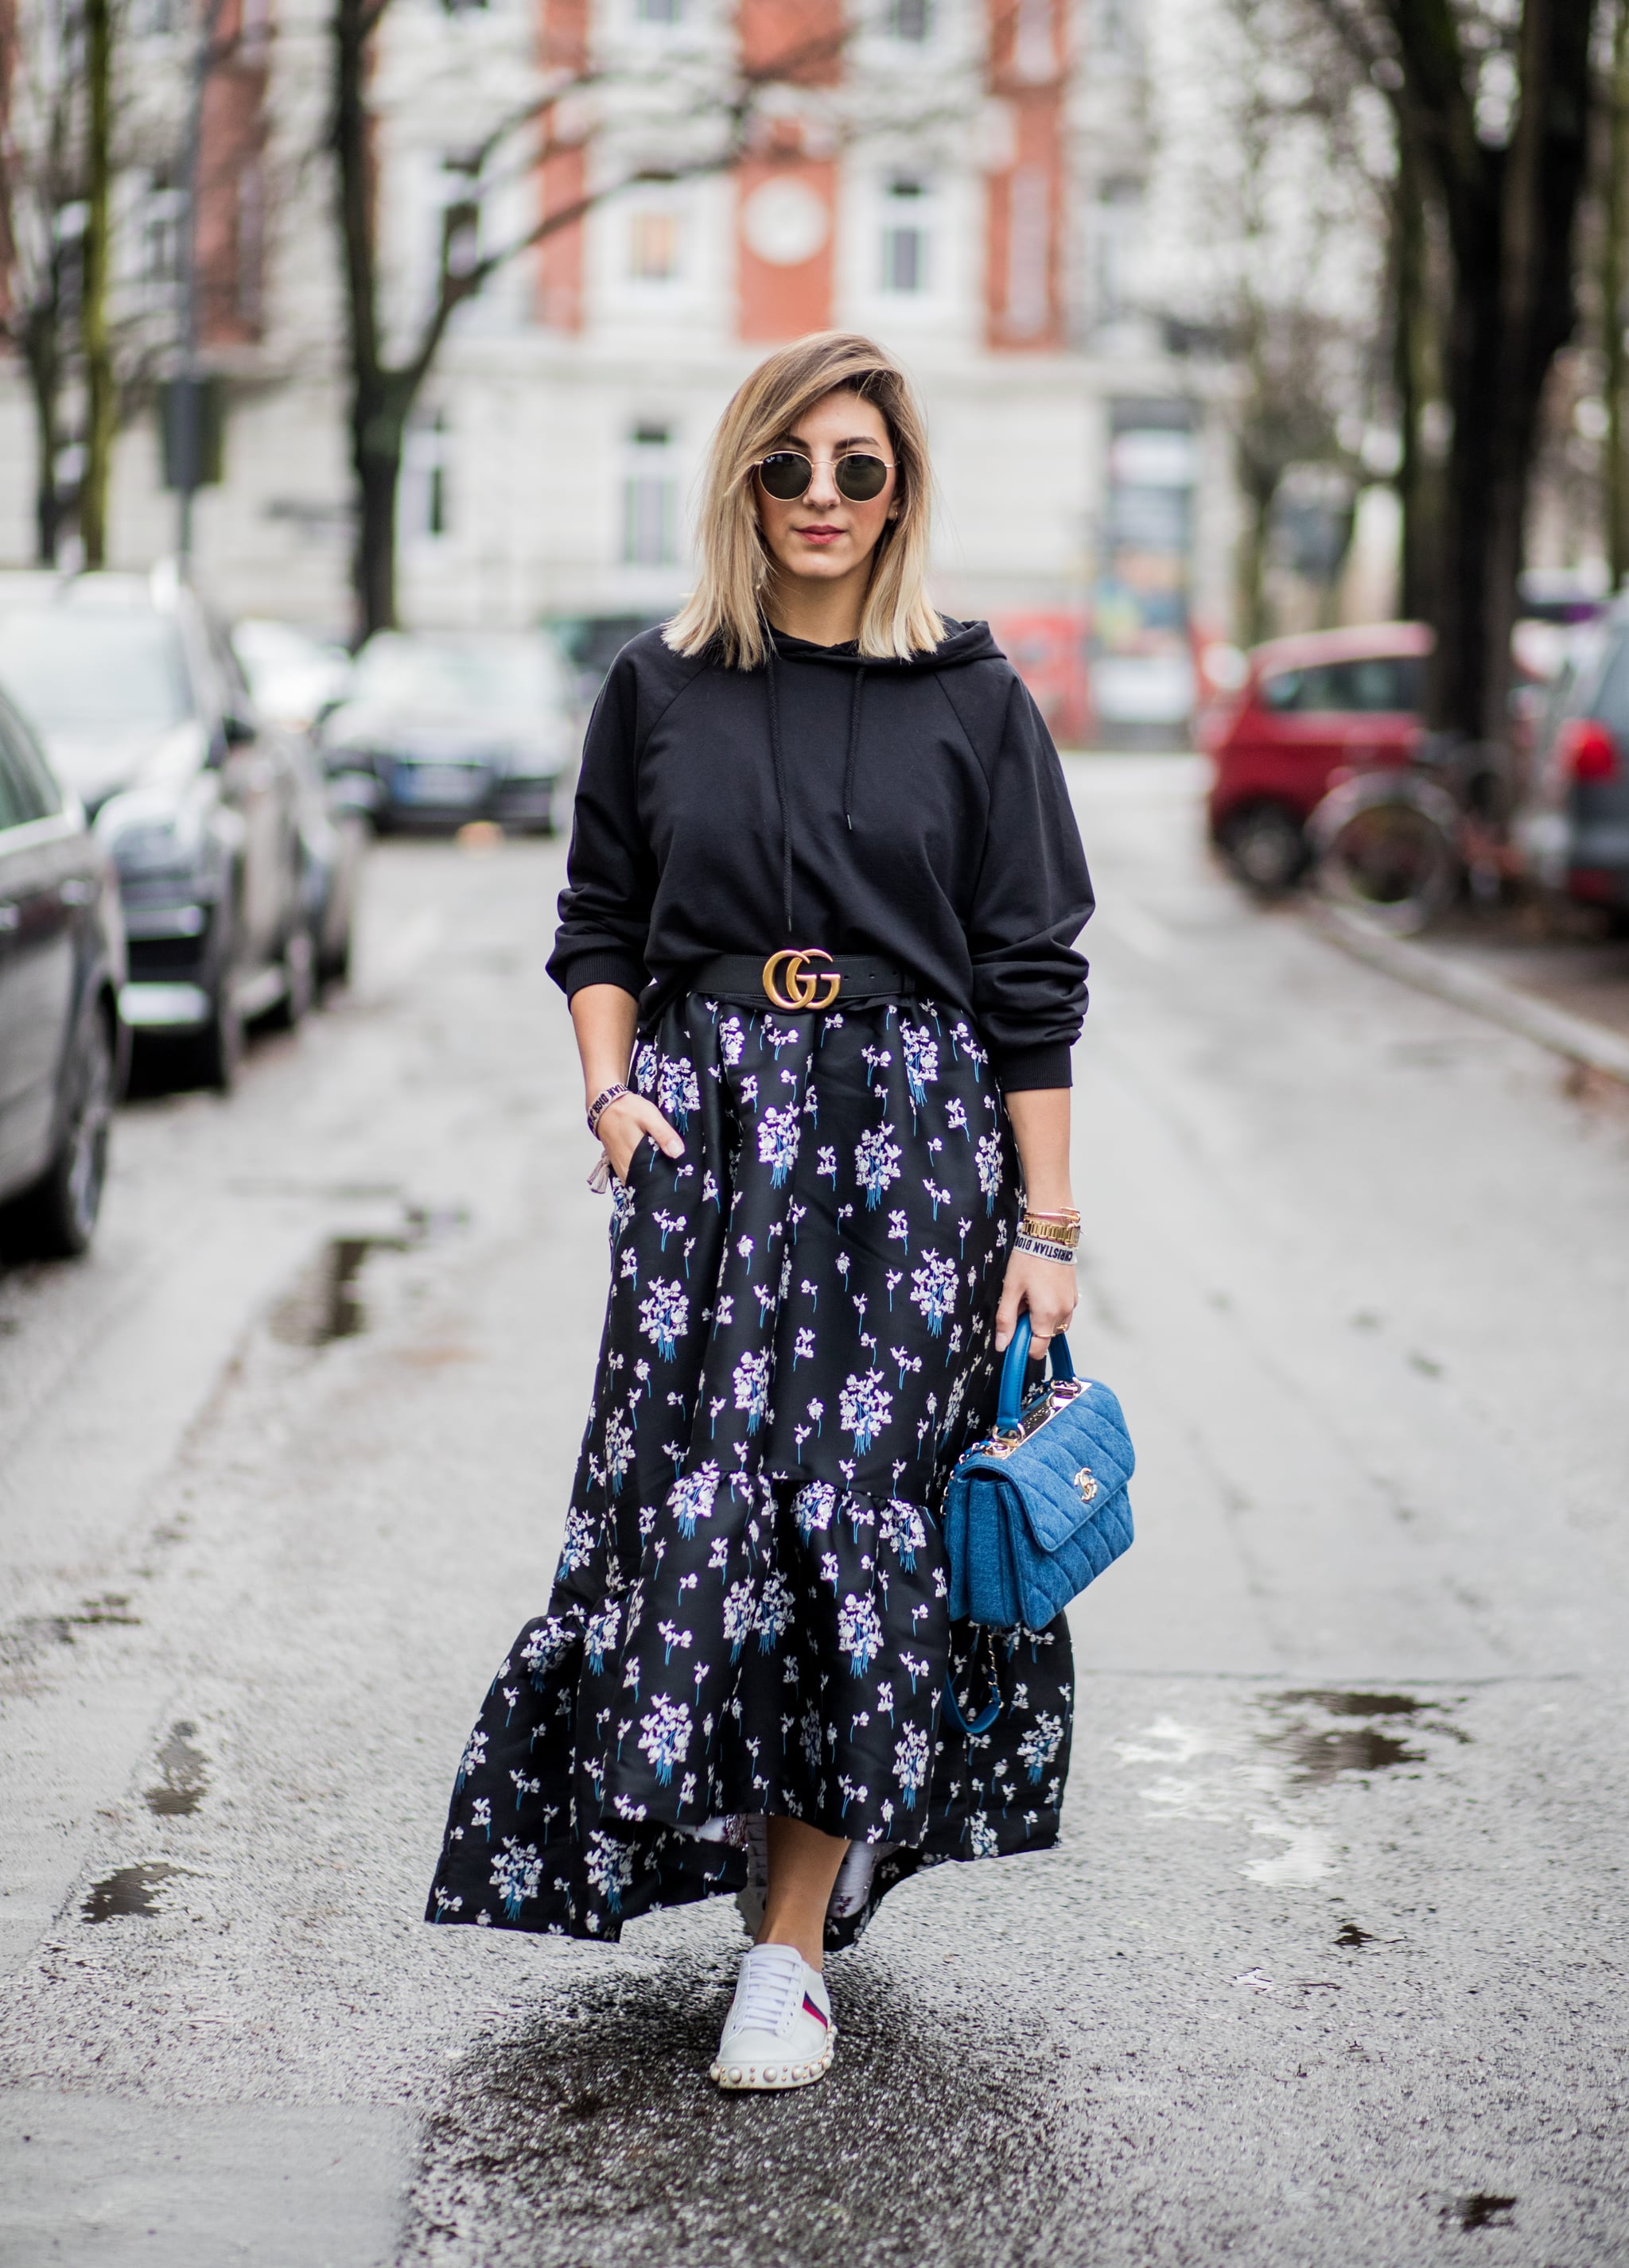 maxi skirt with trainers